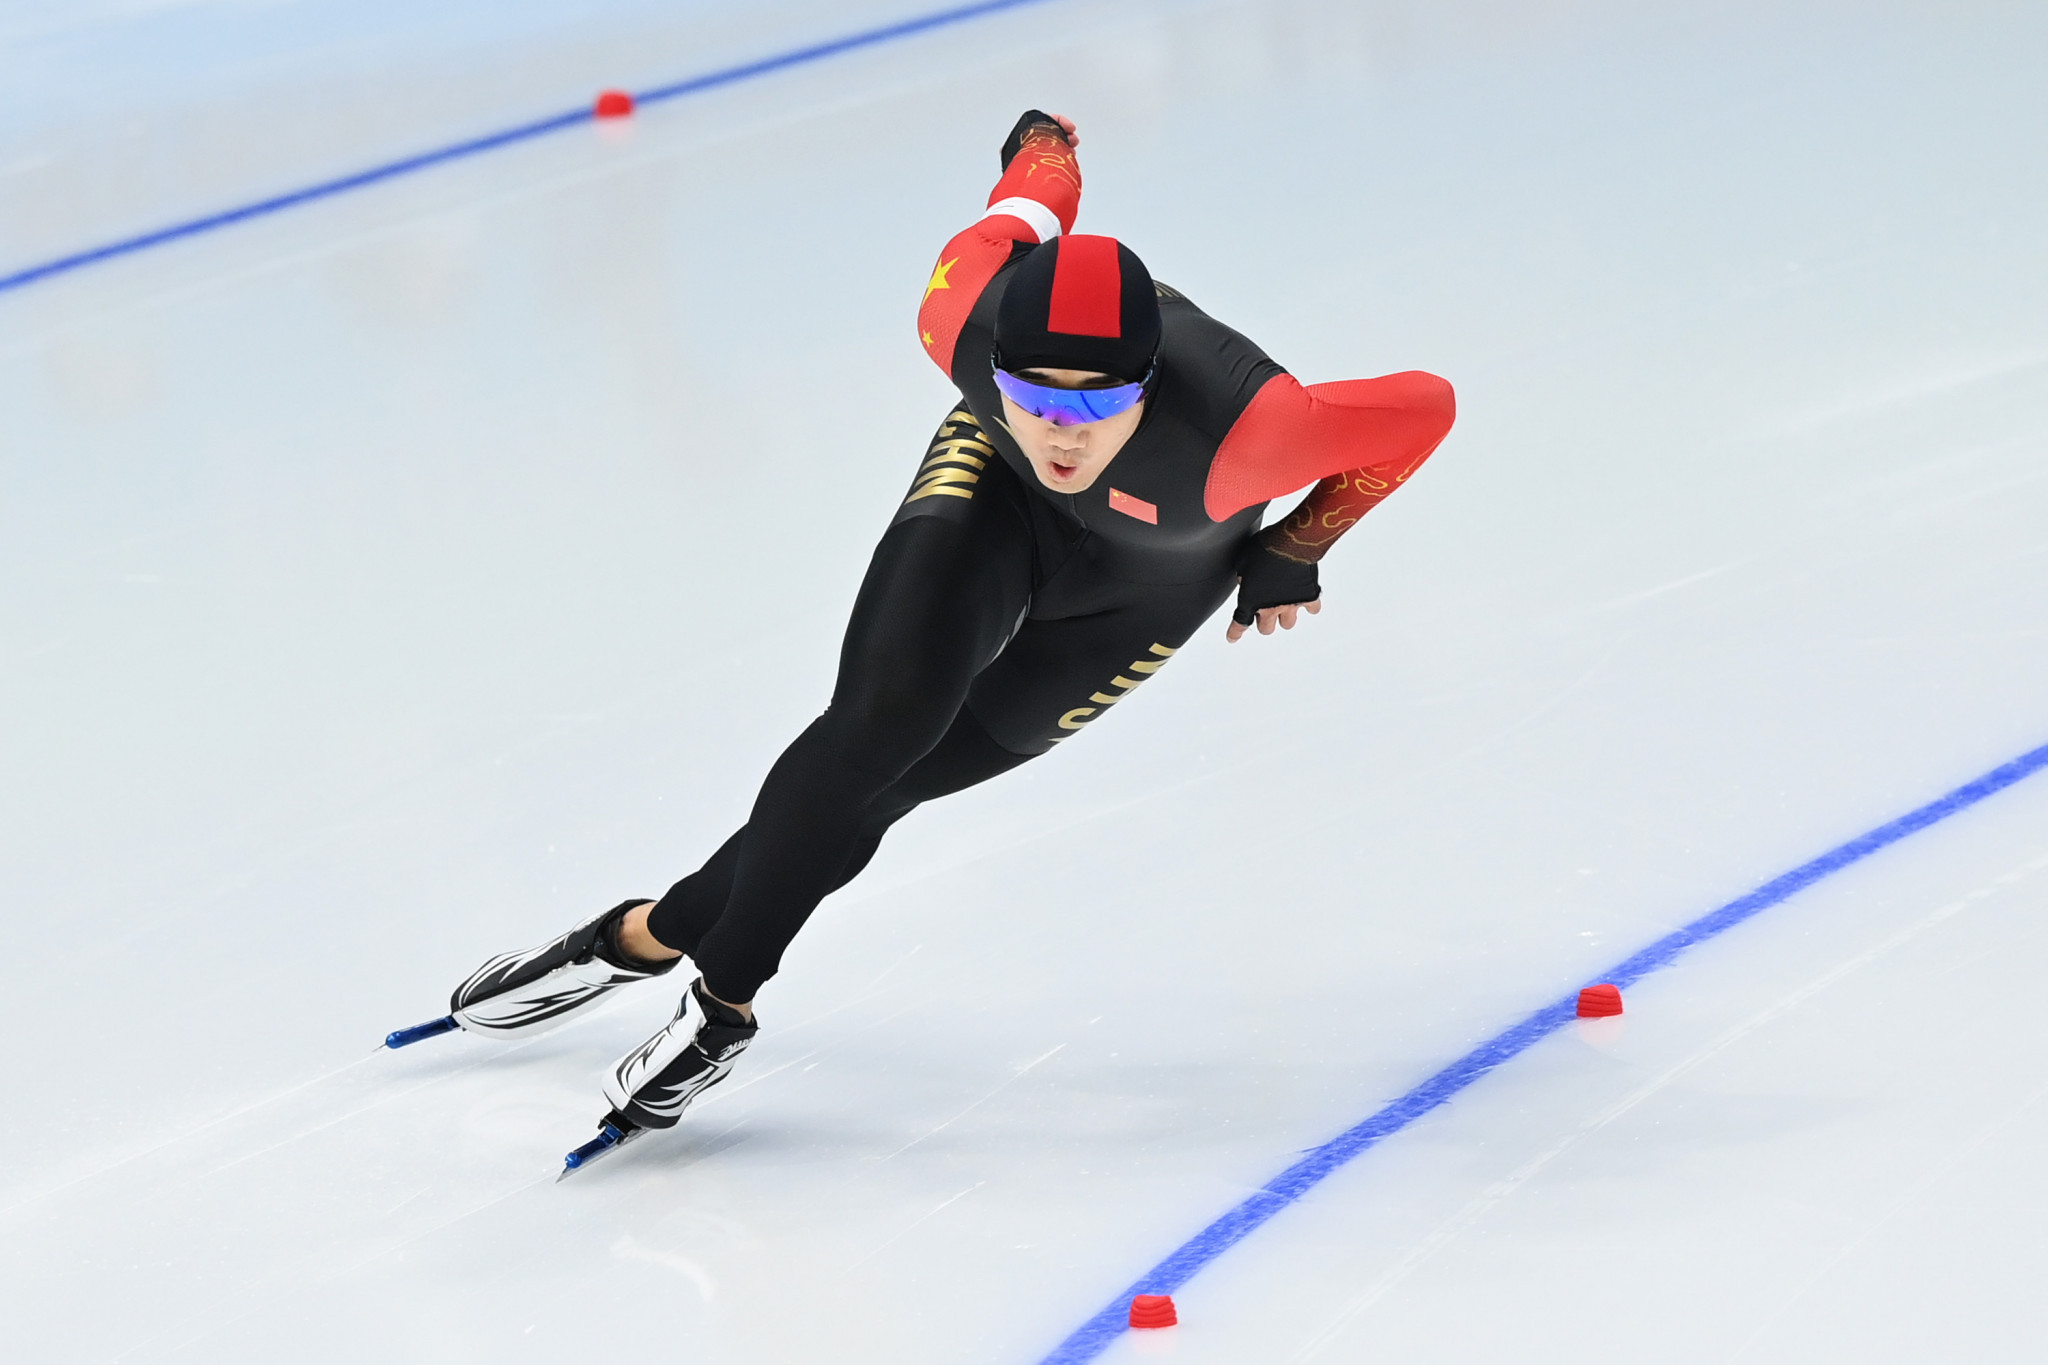 China's Gao Tingyu became the first male Olympic speed skating champion from his nation ©Getty Images